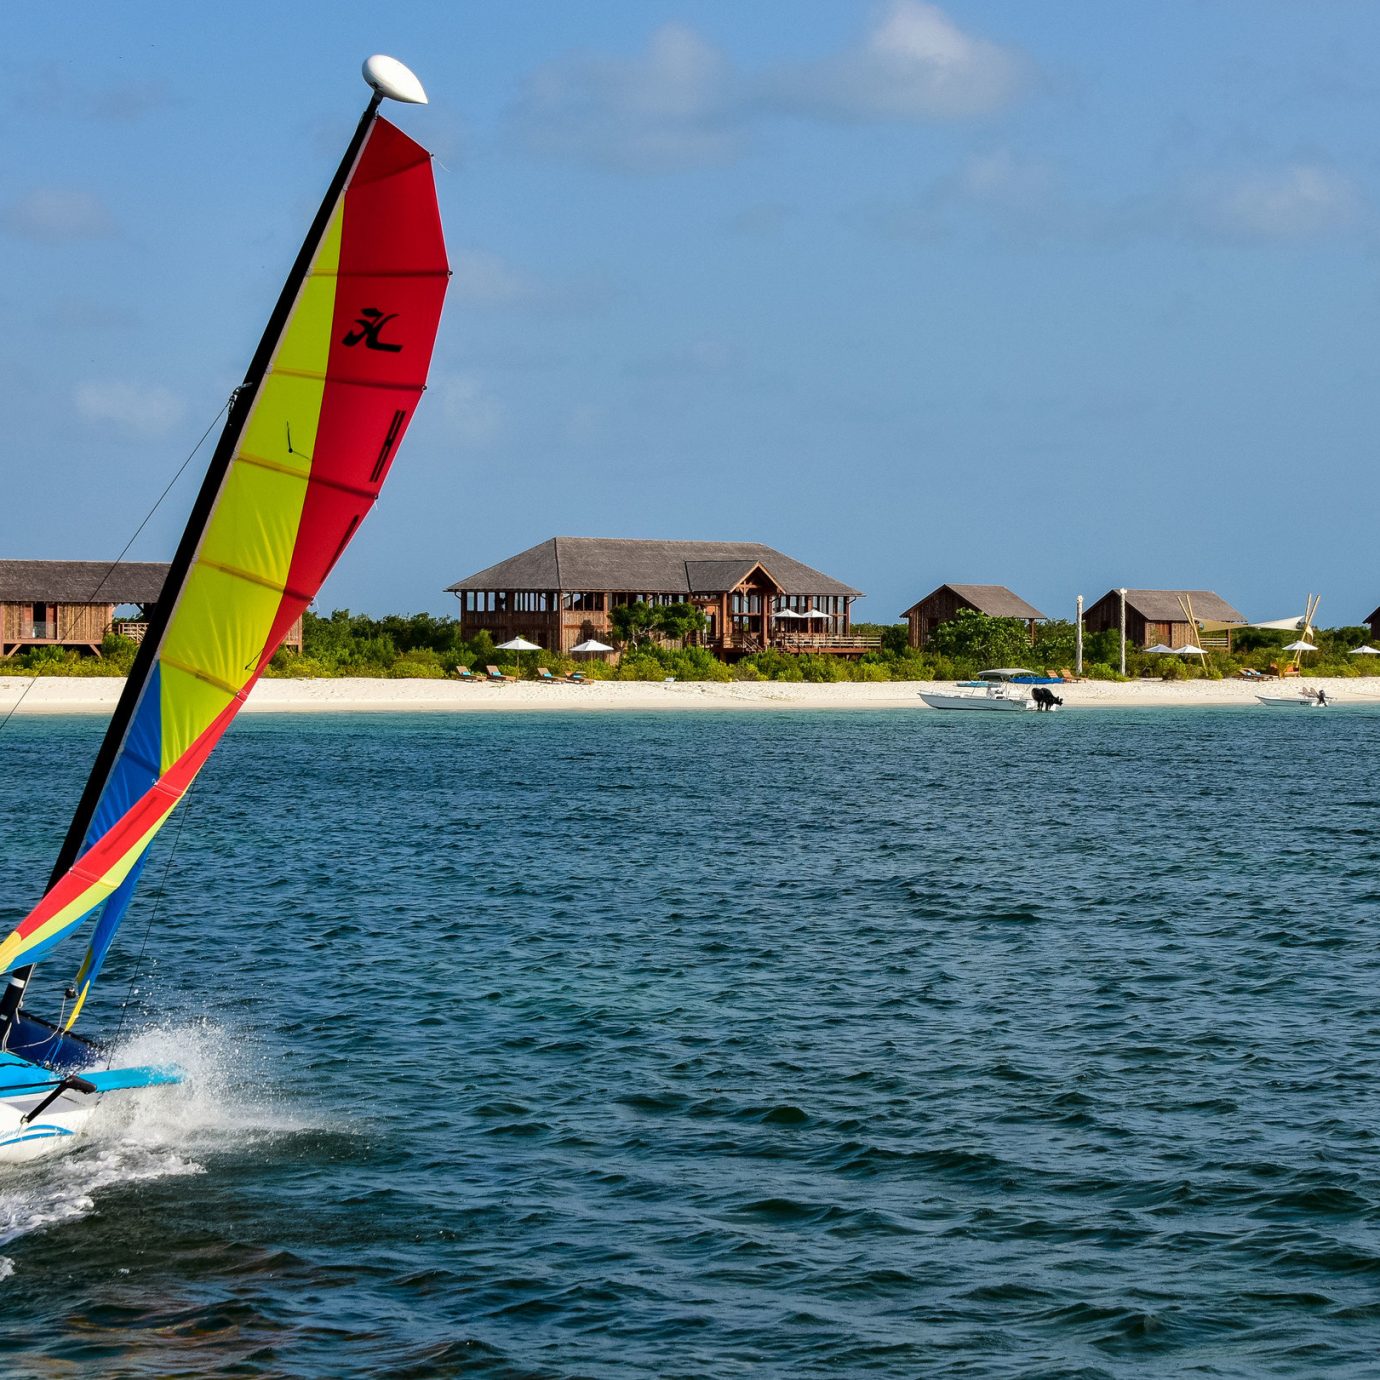 sky water windsurfing water sport sports surfing sail Sport dinghy sailing sailboat Lake wind outdoor recreation vehicle boating Boat Sea recreation wind wave sailing boardsport day